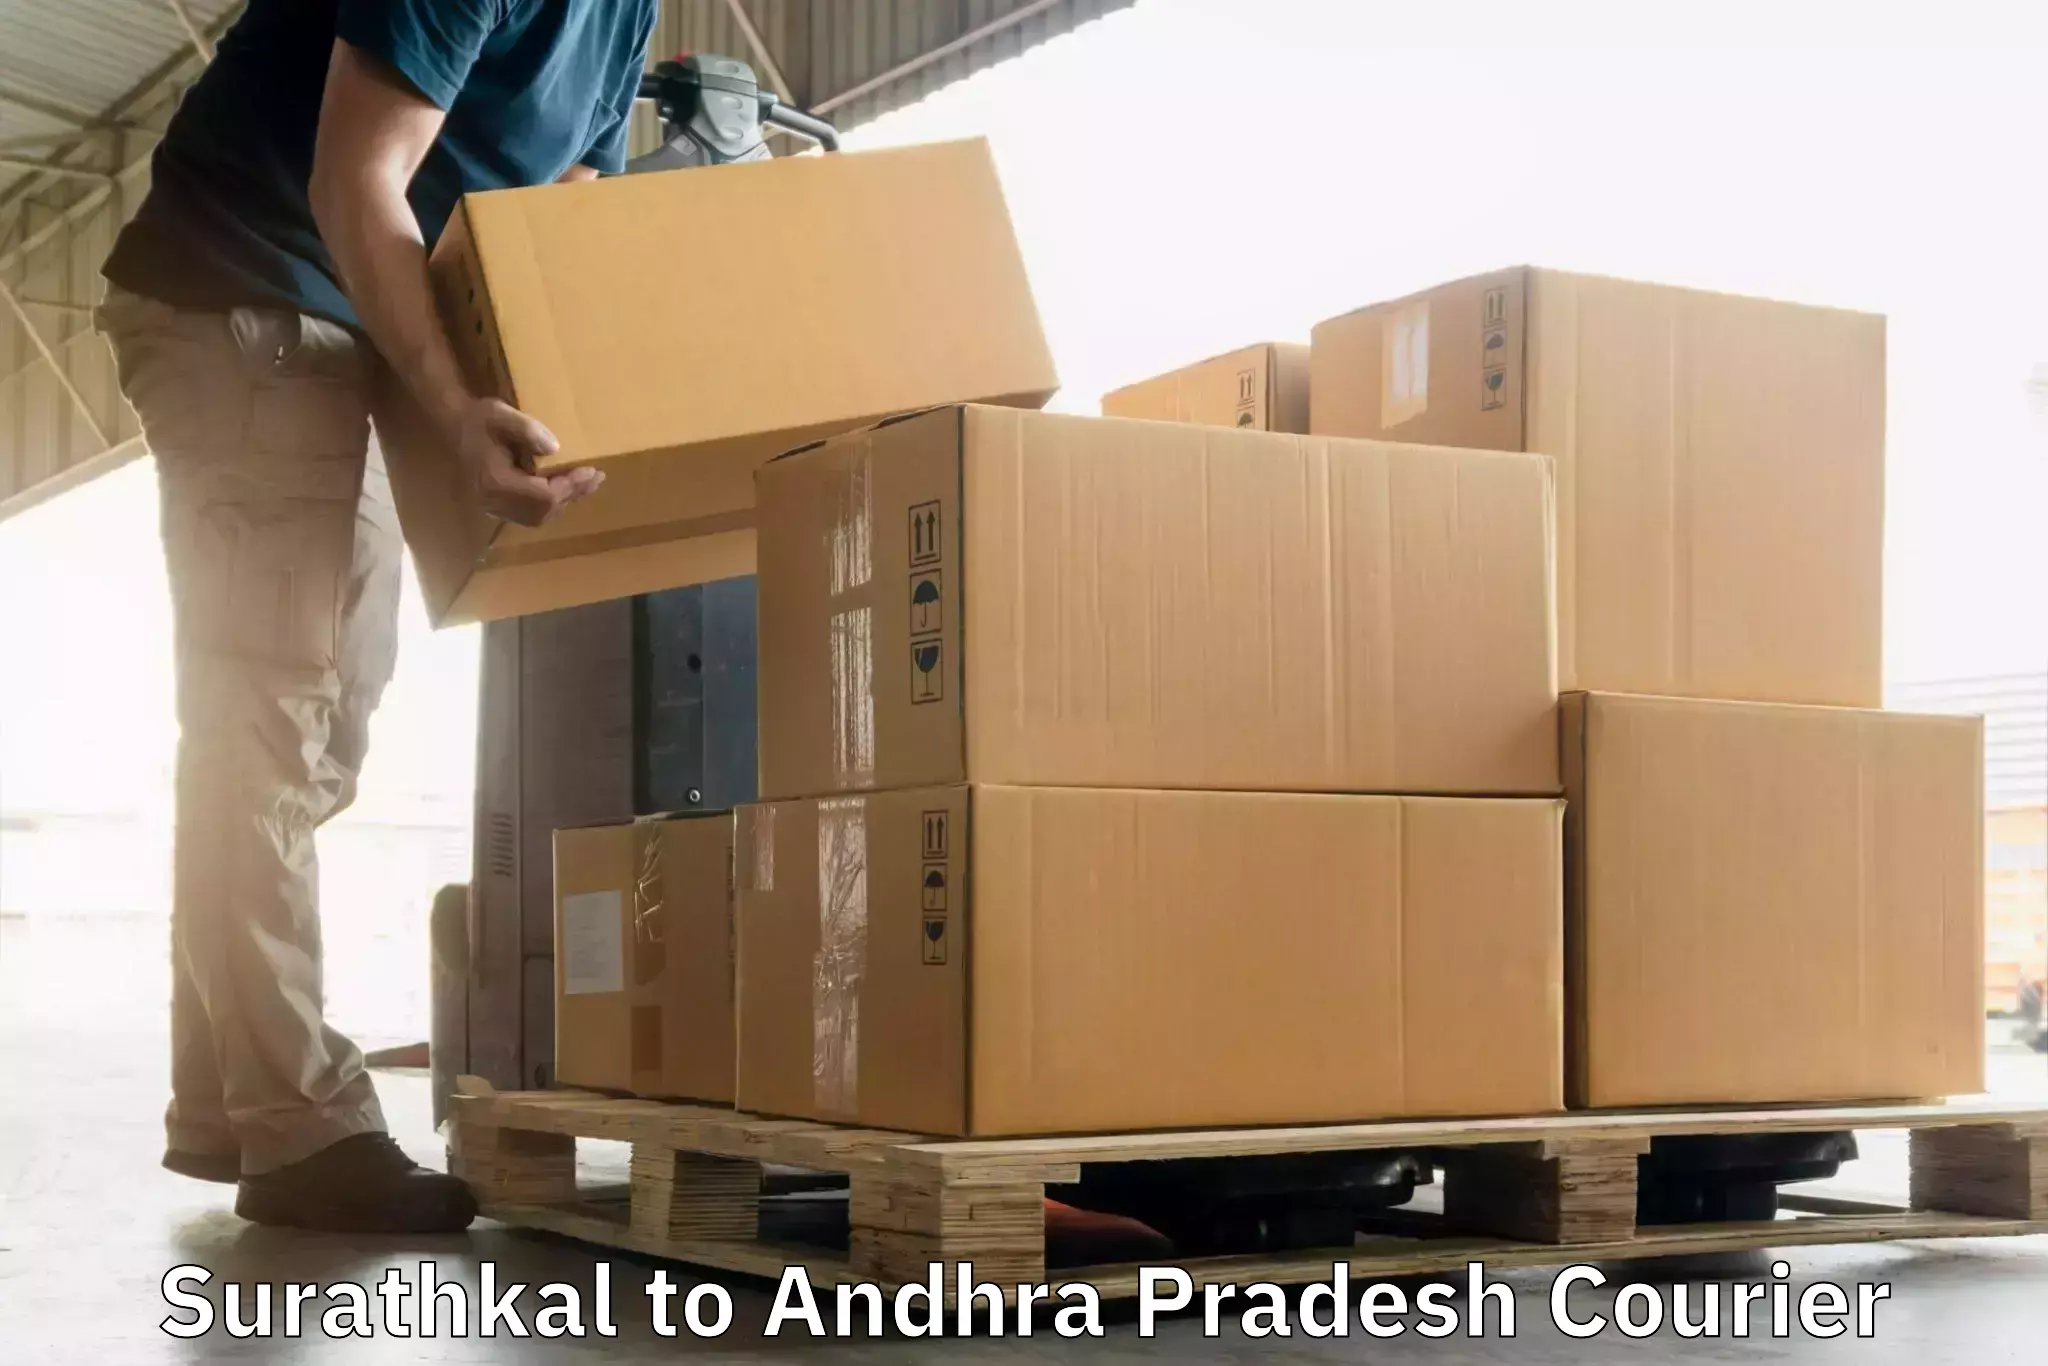 Package delivery network Surathkal to Andhra Pradesh